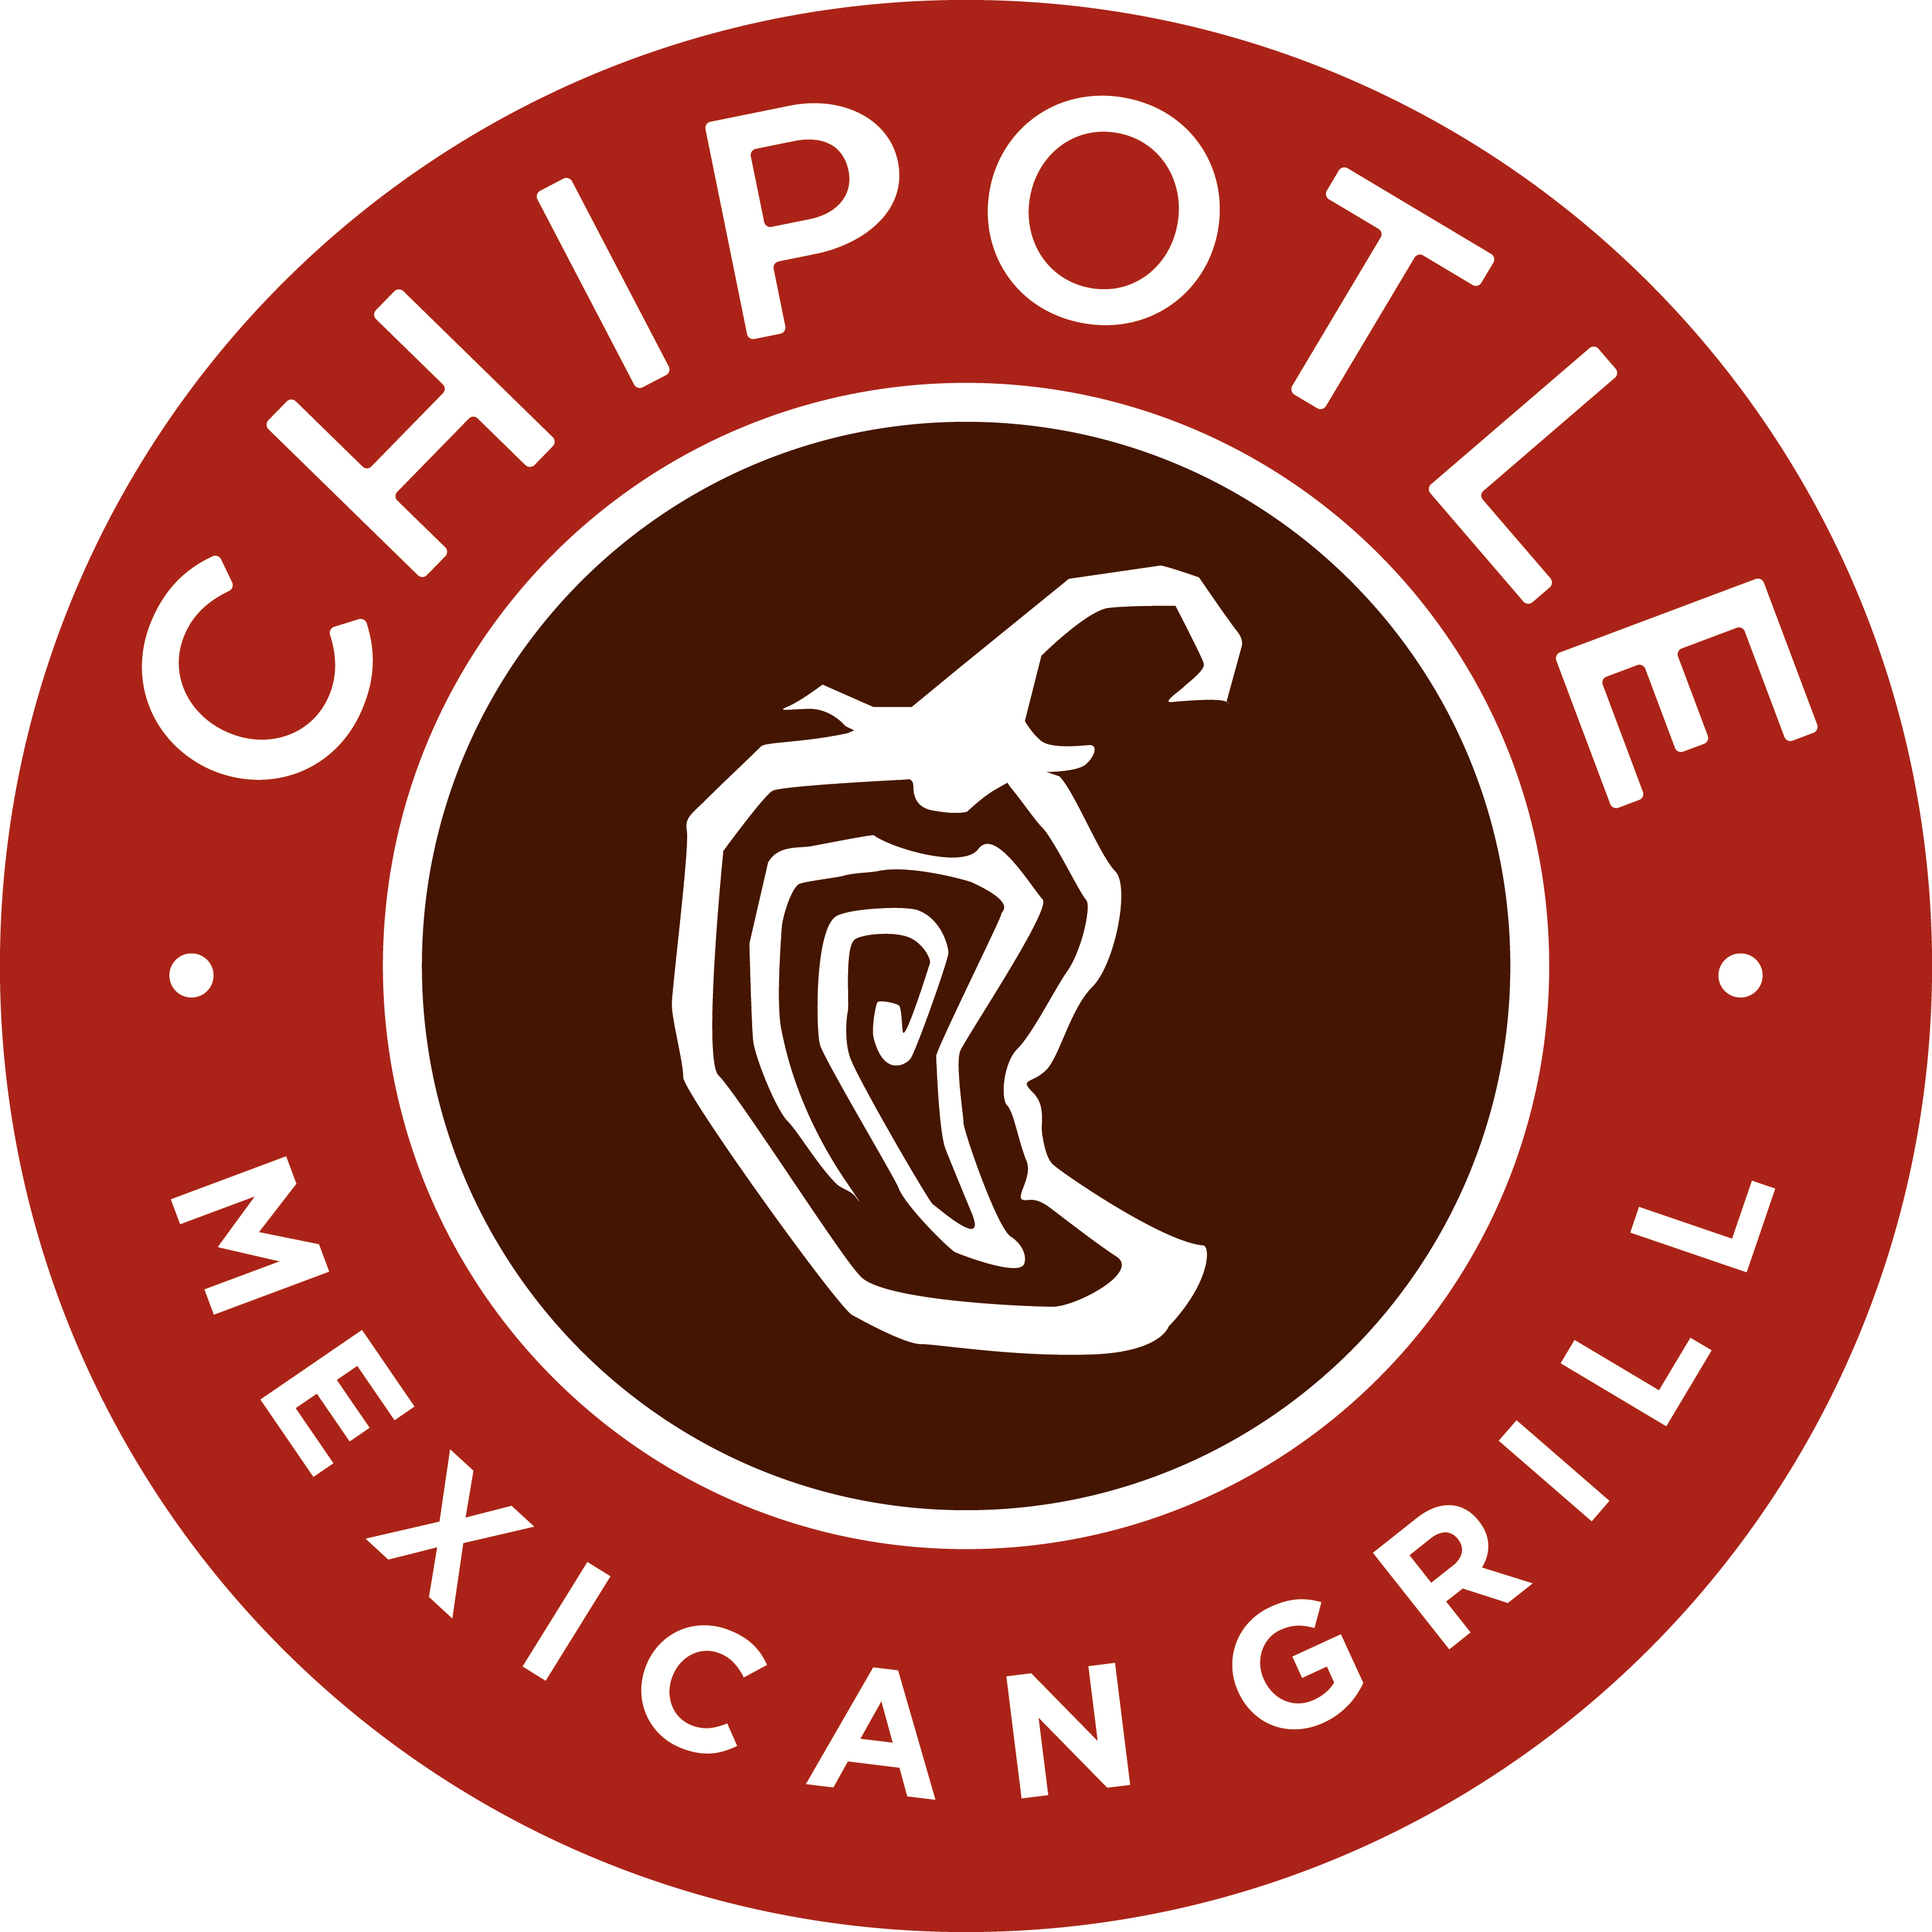 Chipotle Mexican Grill Restaurant Support Center logo